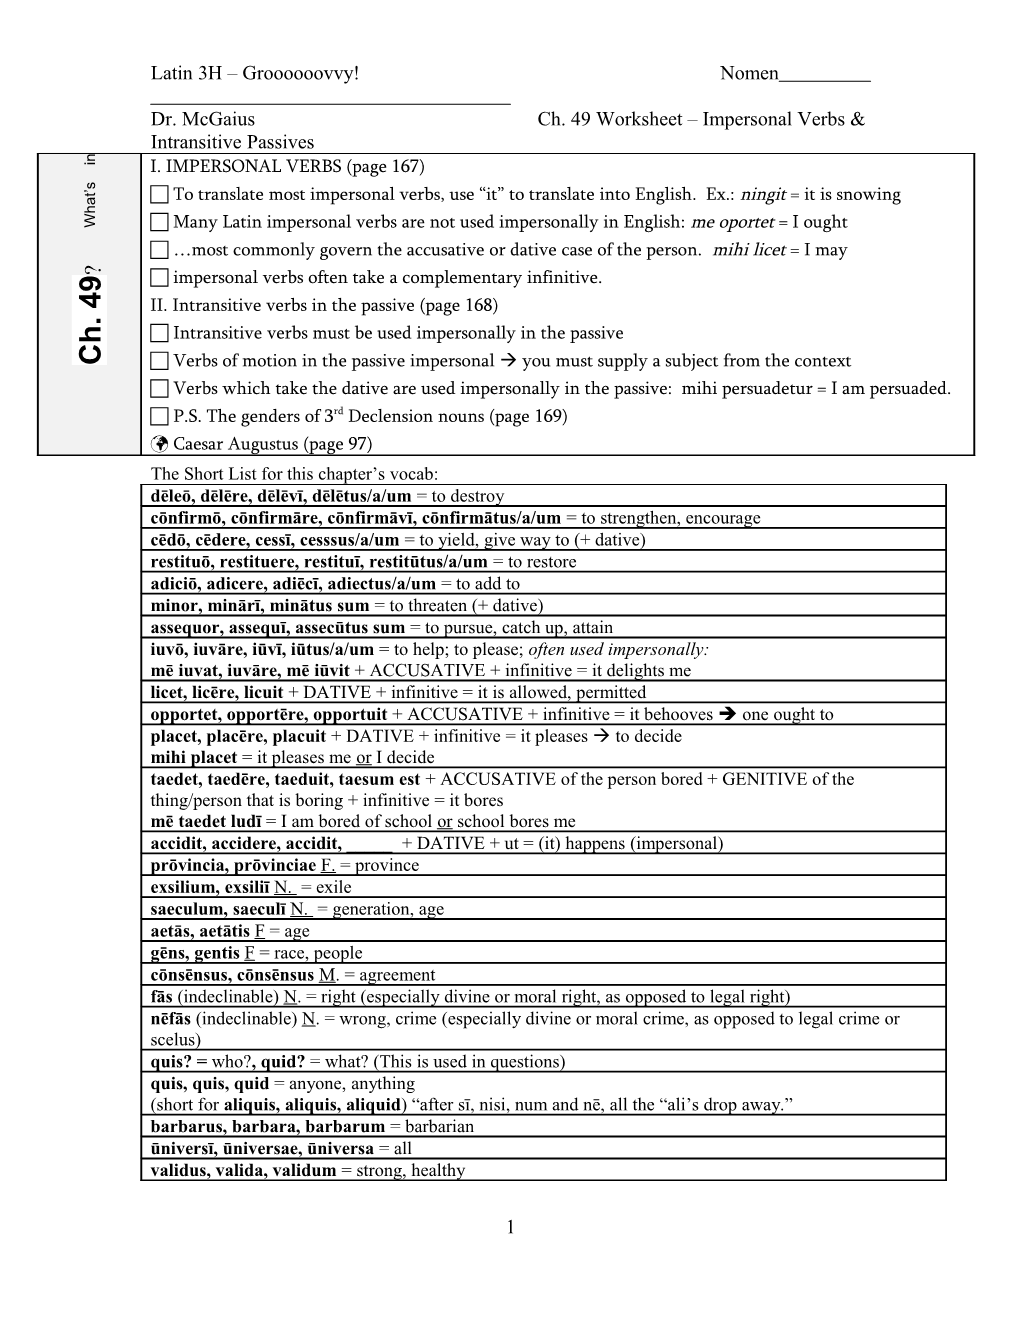 Dr. Mcgaiusch. 49 Worksheet Impersonal Verbs & Intransitive Passives